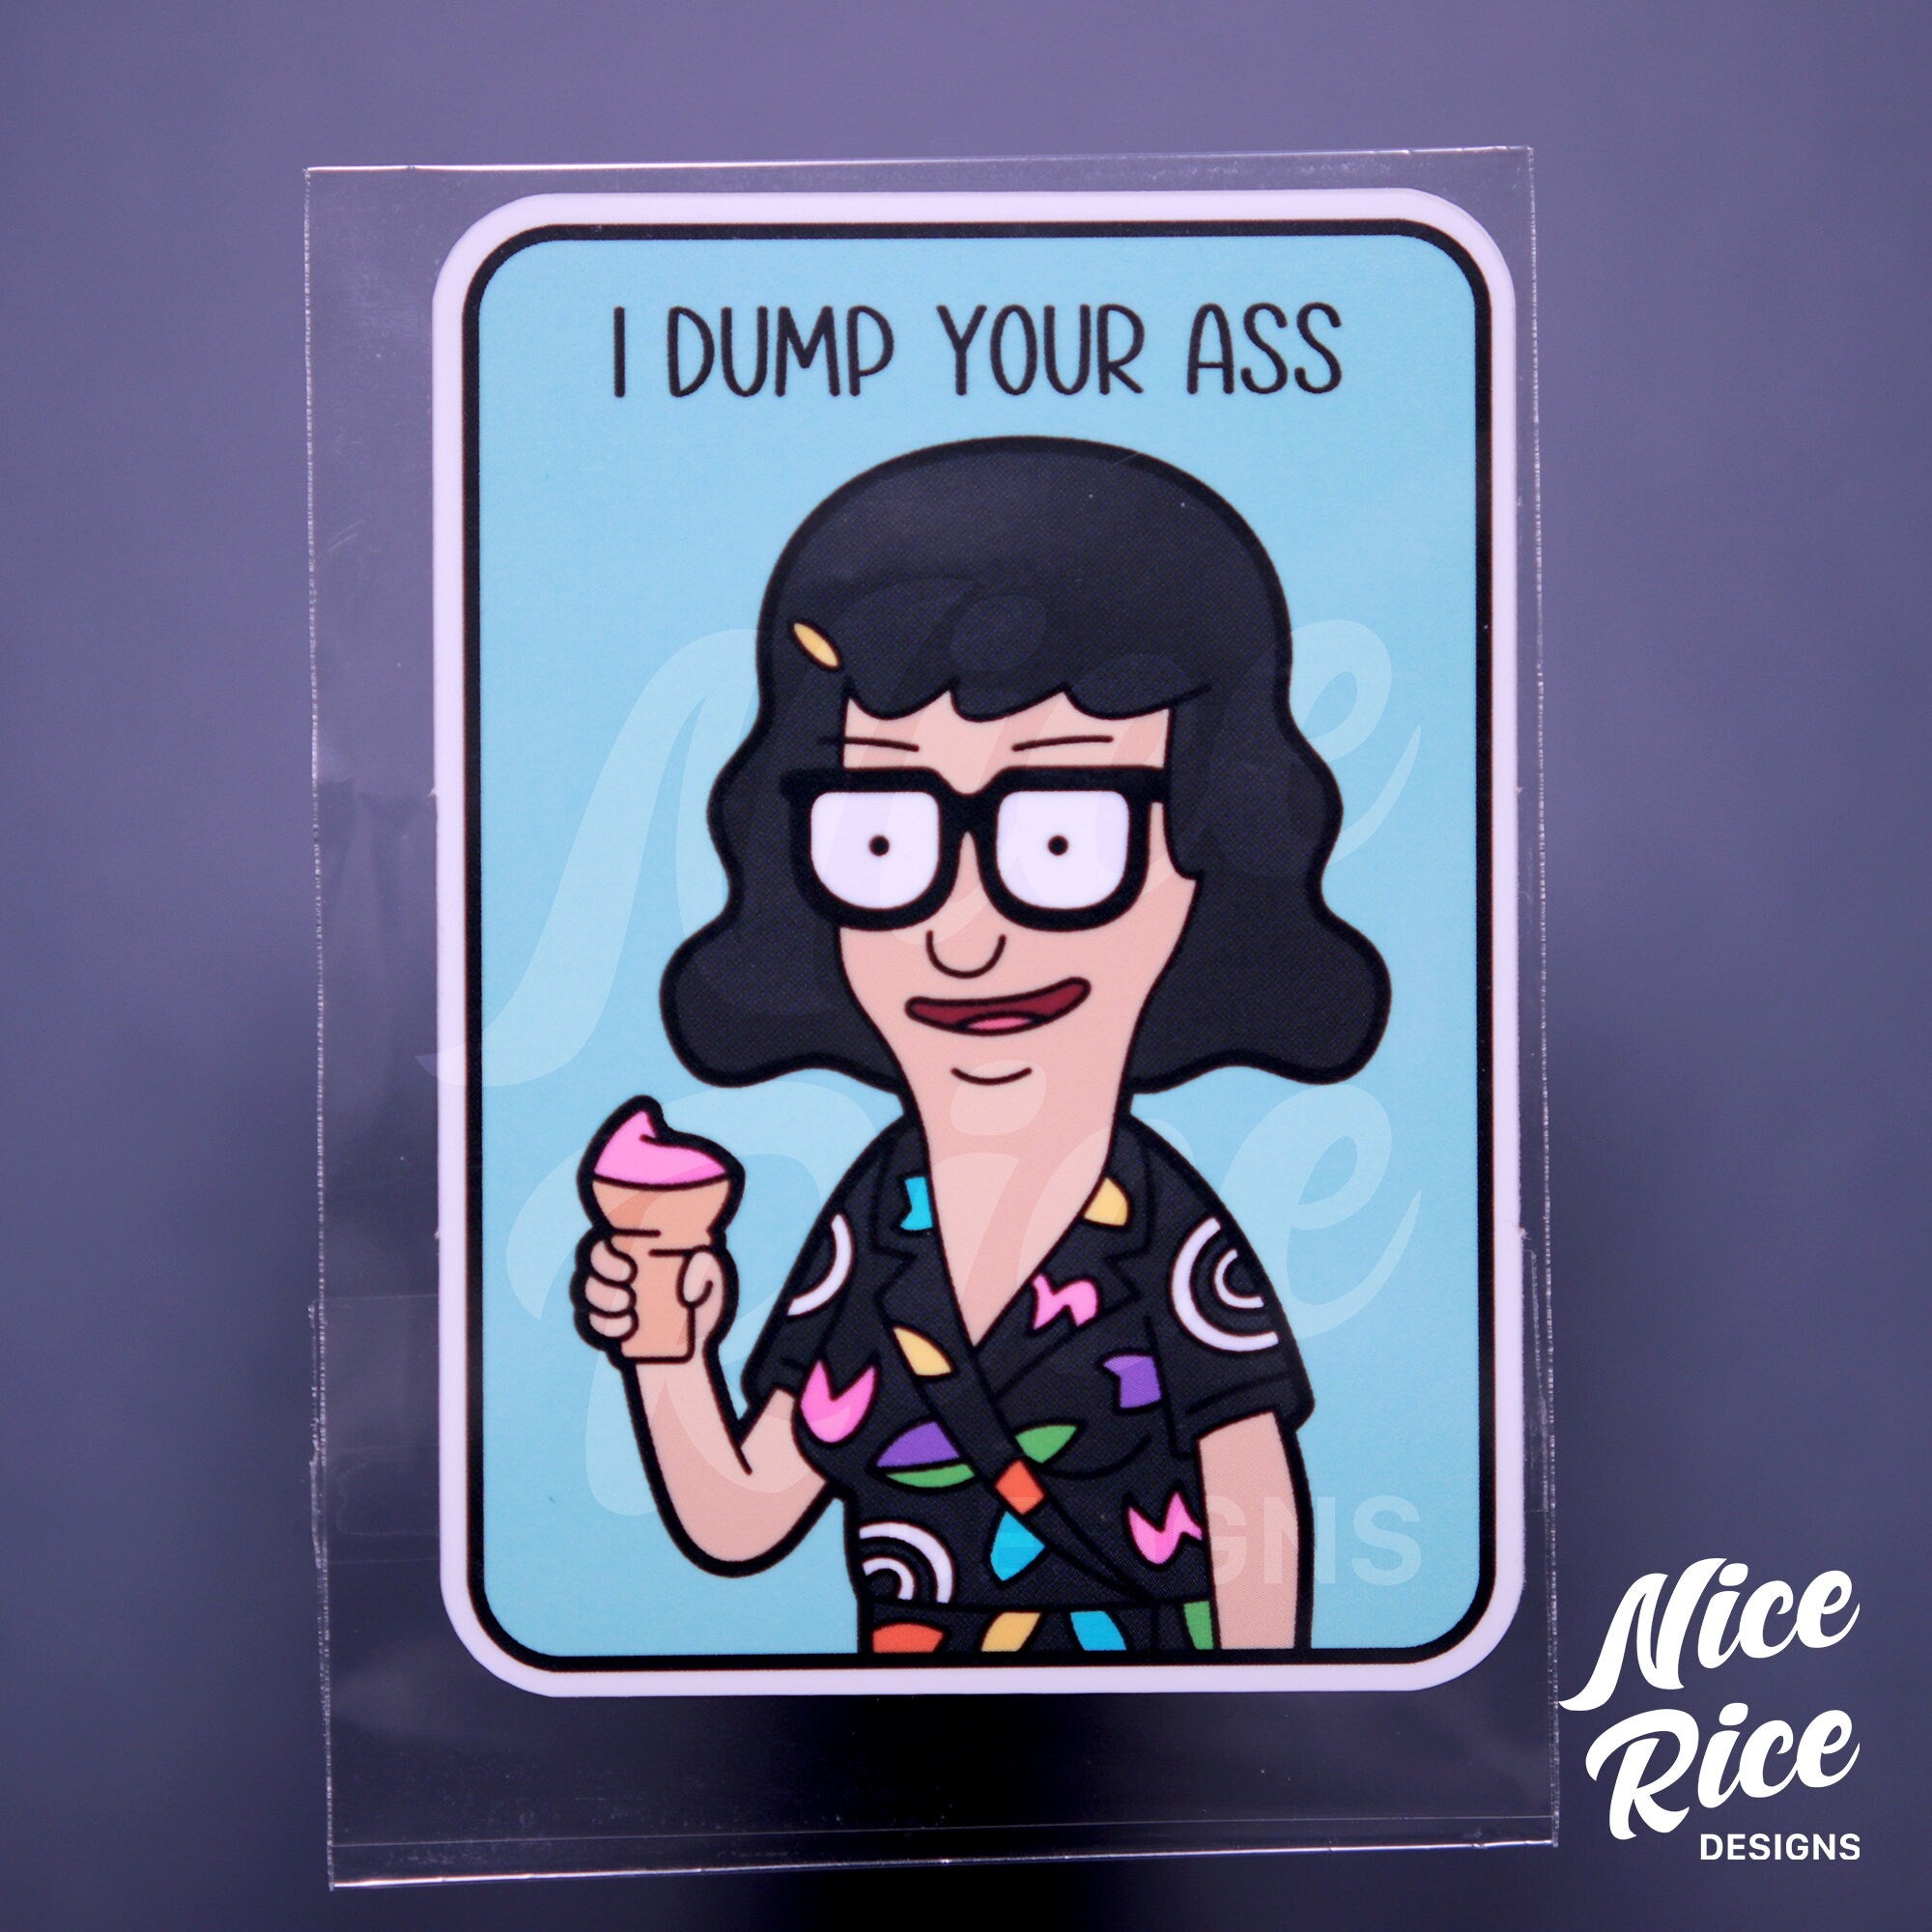 I Dump Your A** Sticker by Nice Rice Designs